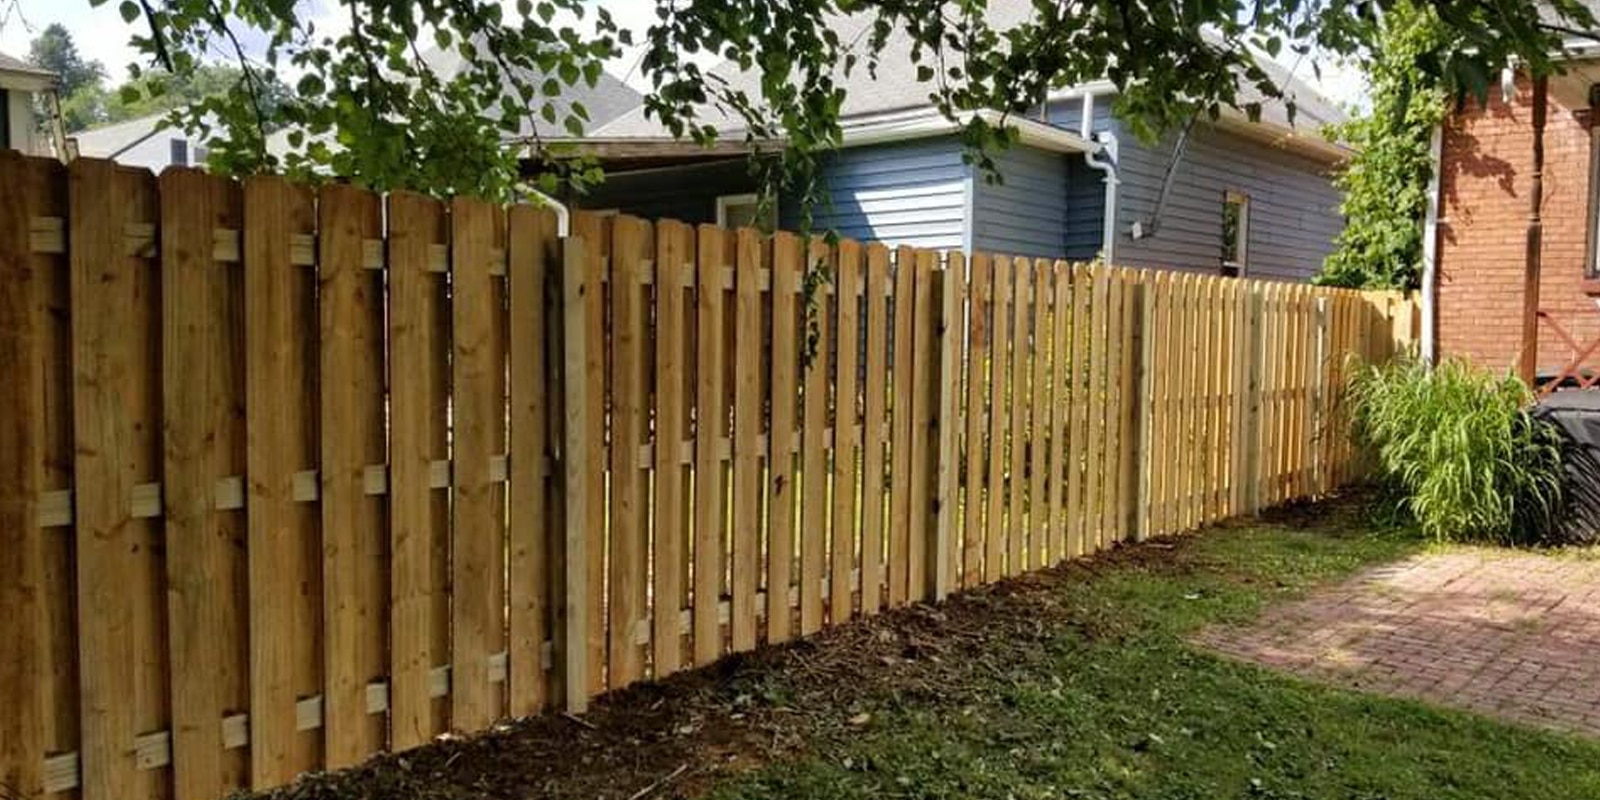 Residential Fences - 304 Fence - Pro Fence Contractor